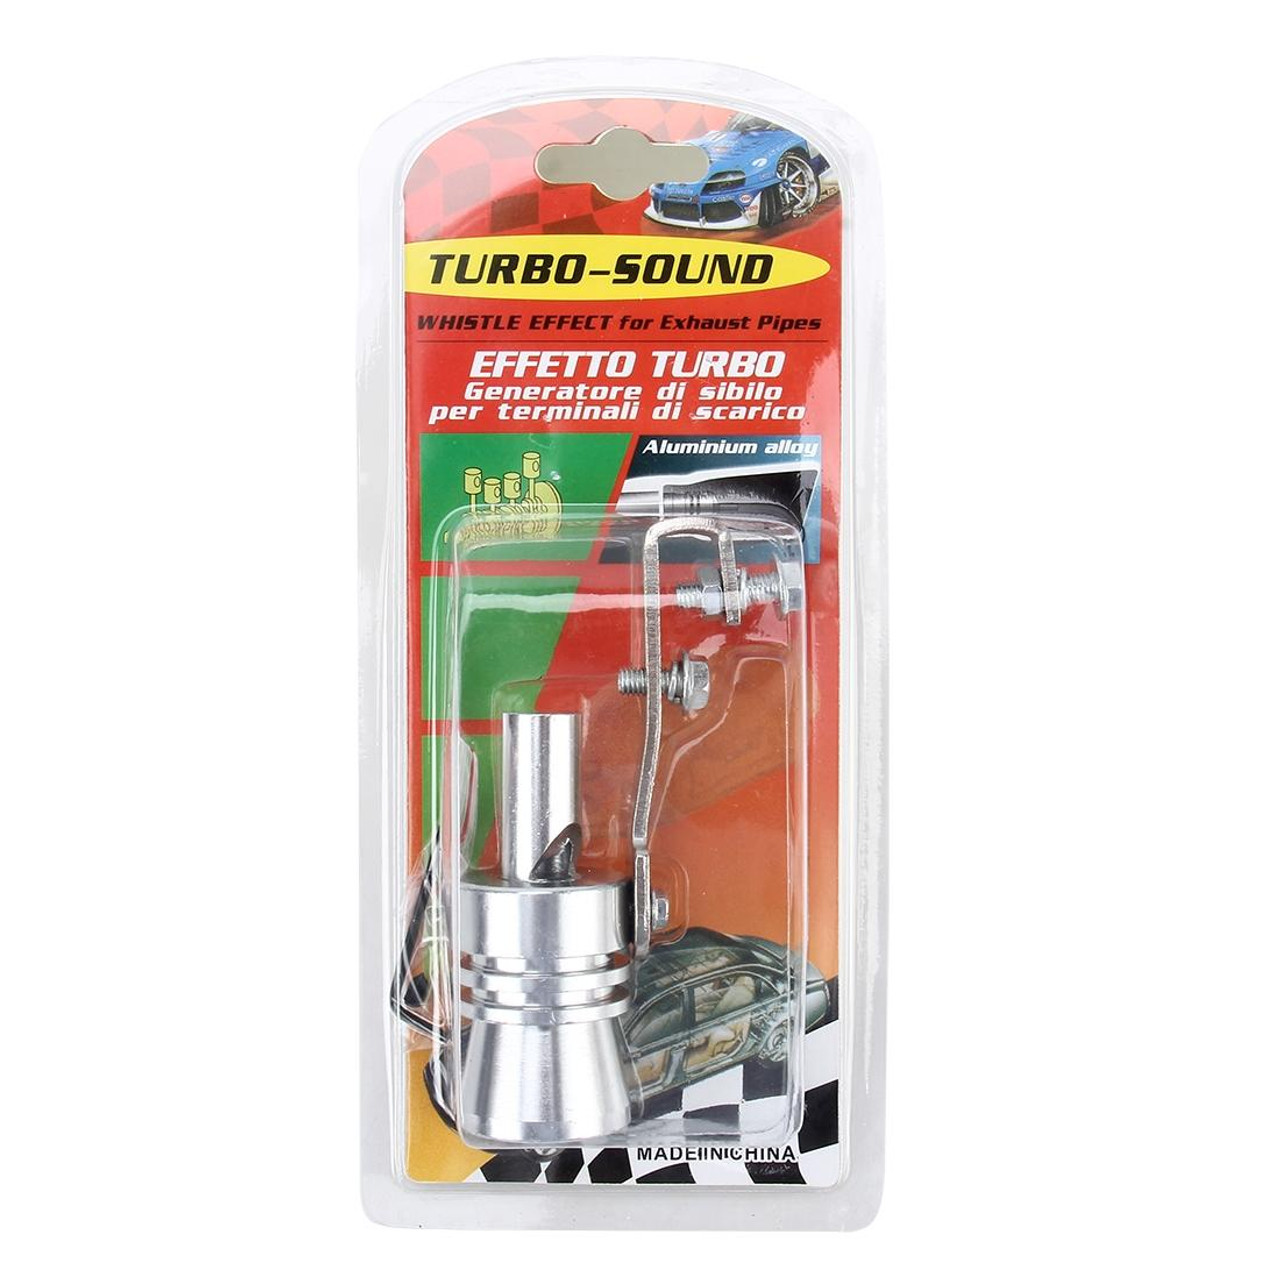 Car Turbo Whistle Modified Exhaust Sounders Faux Sounders Car Whistle